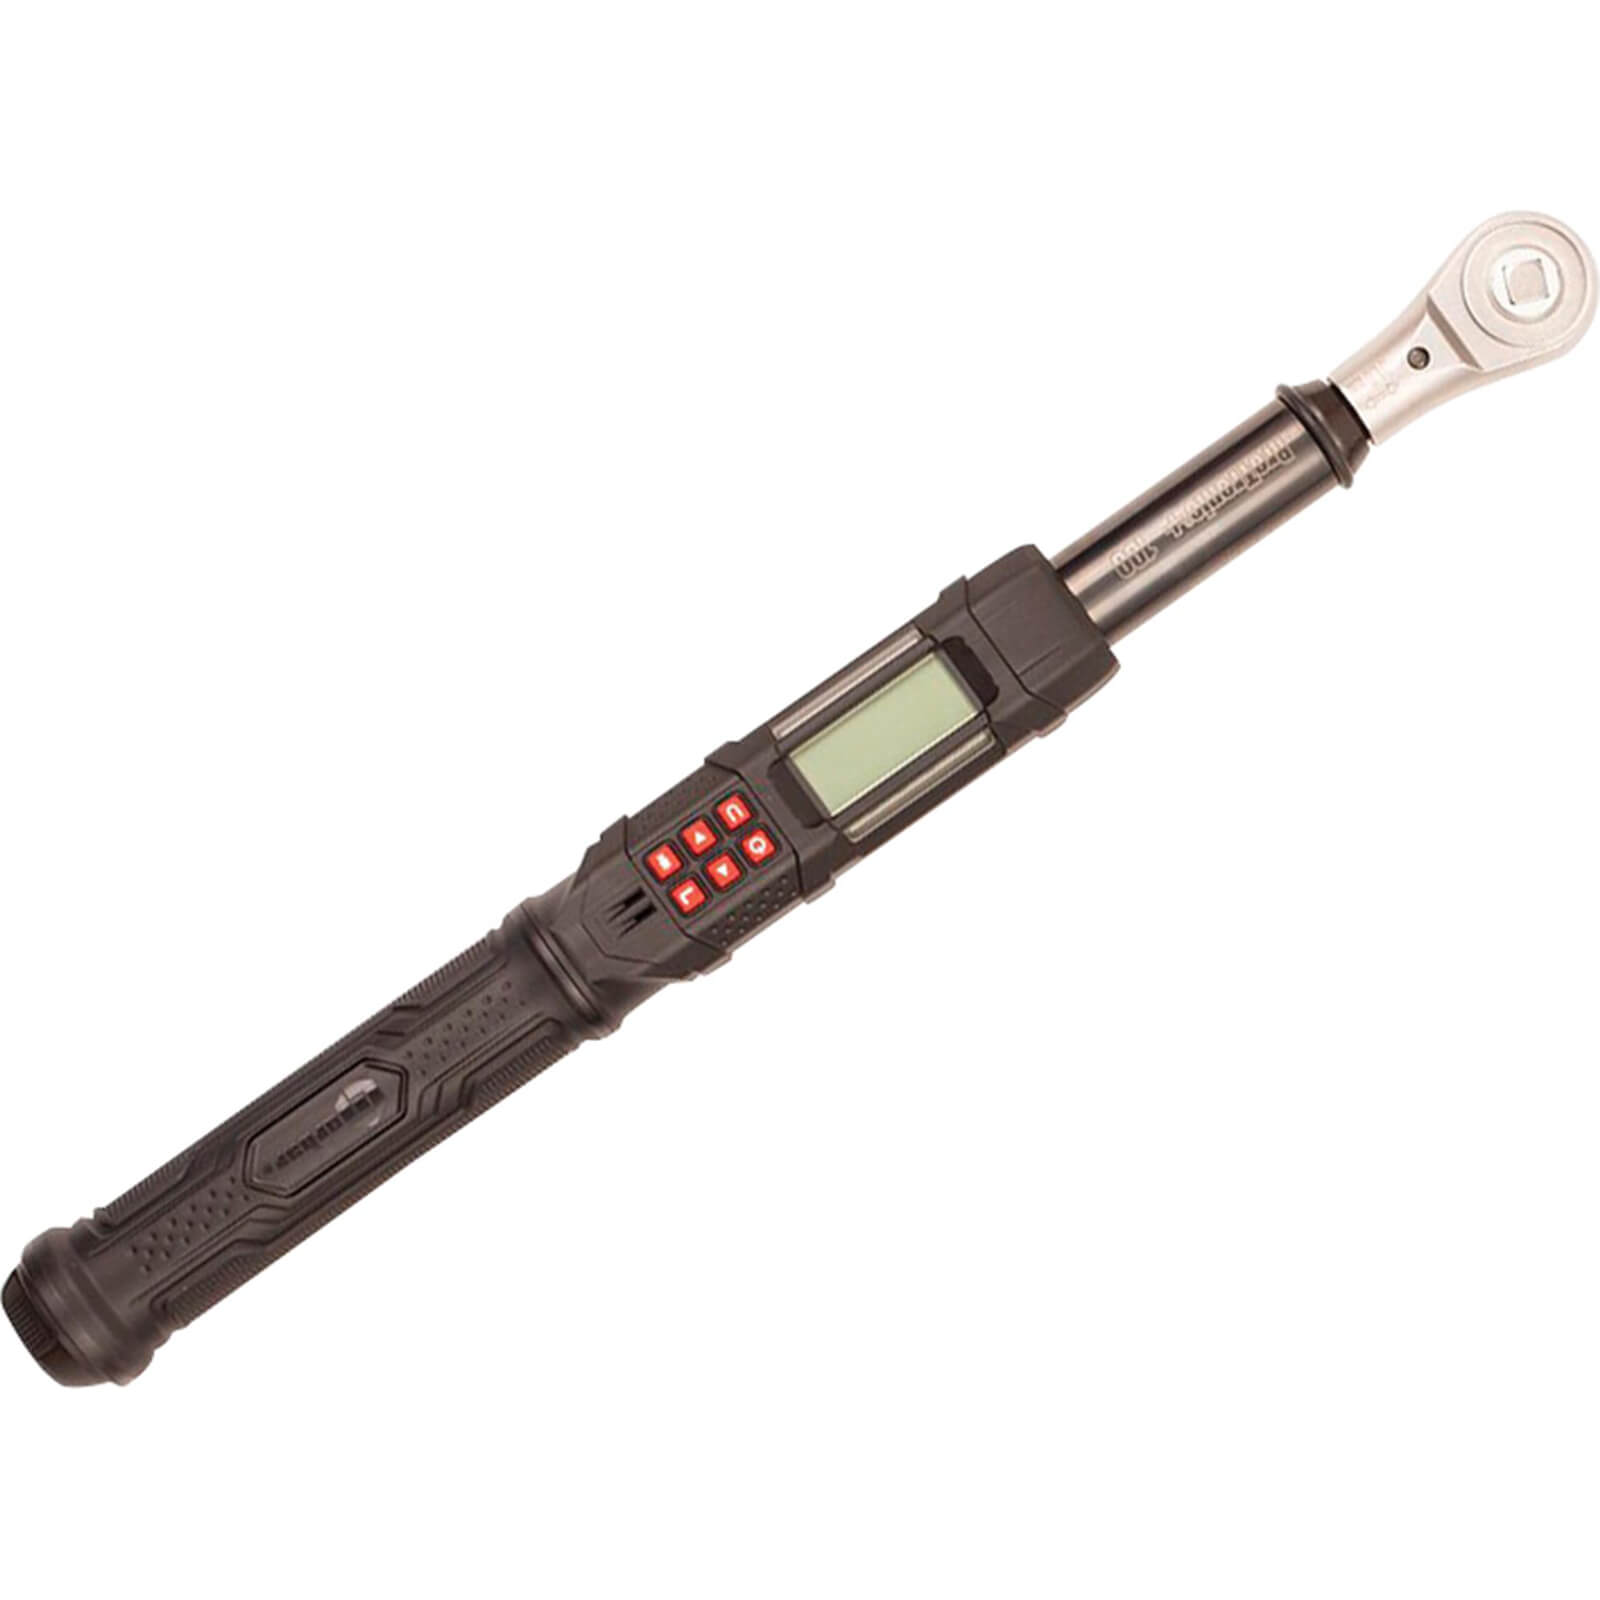 Image of Norbar Protronic Plus Torque Wrench 1/2" Drive 1/2" 5Nm - 100Nm